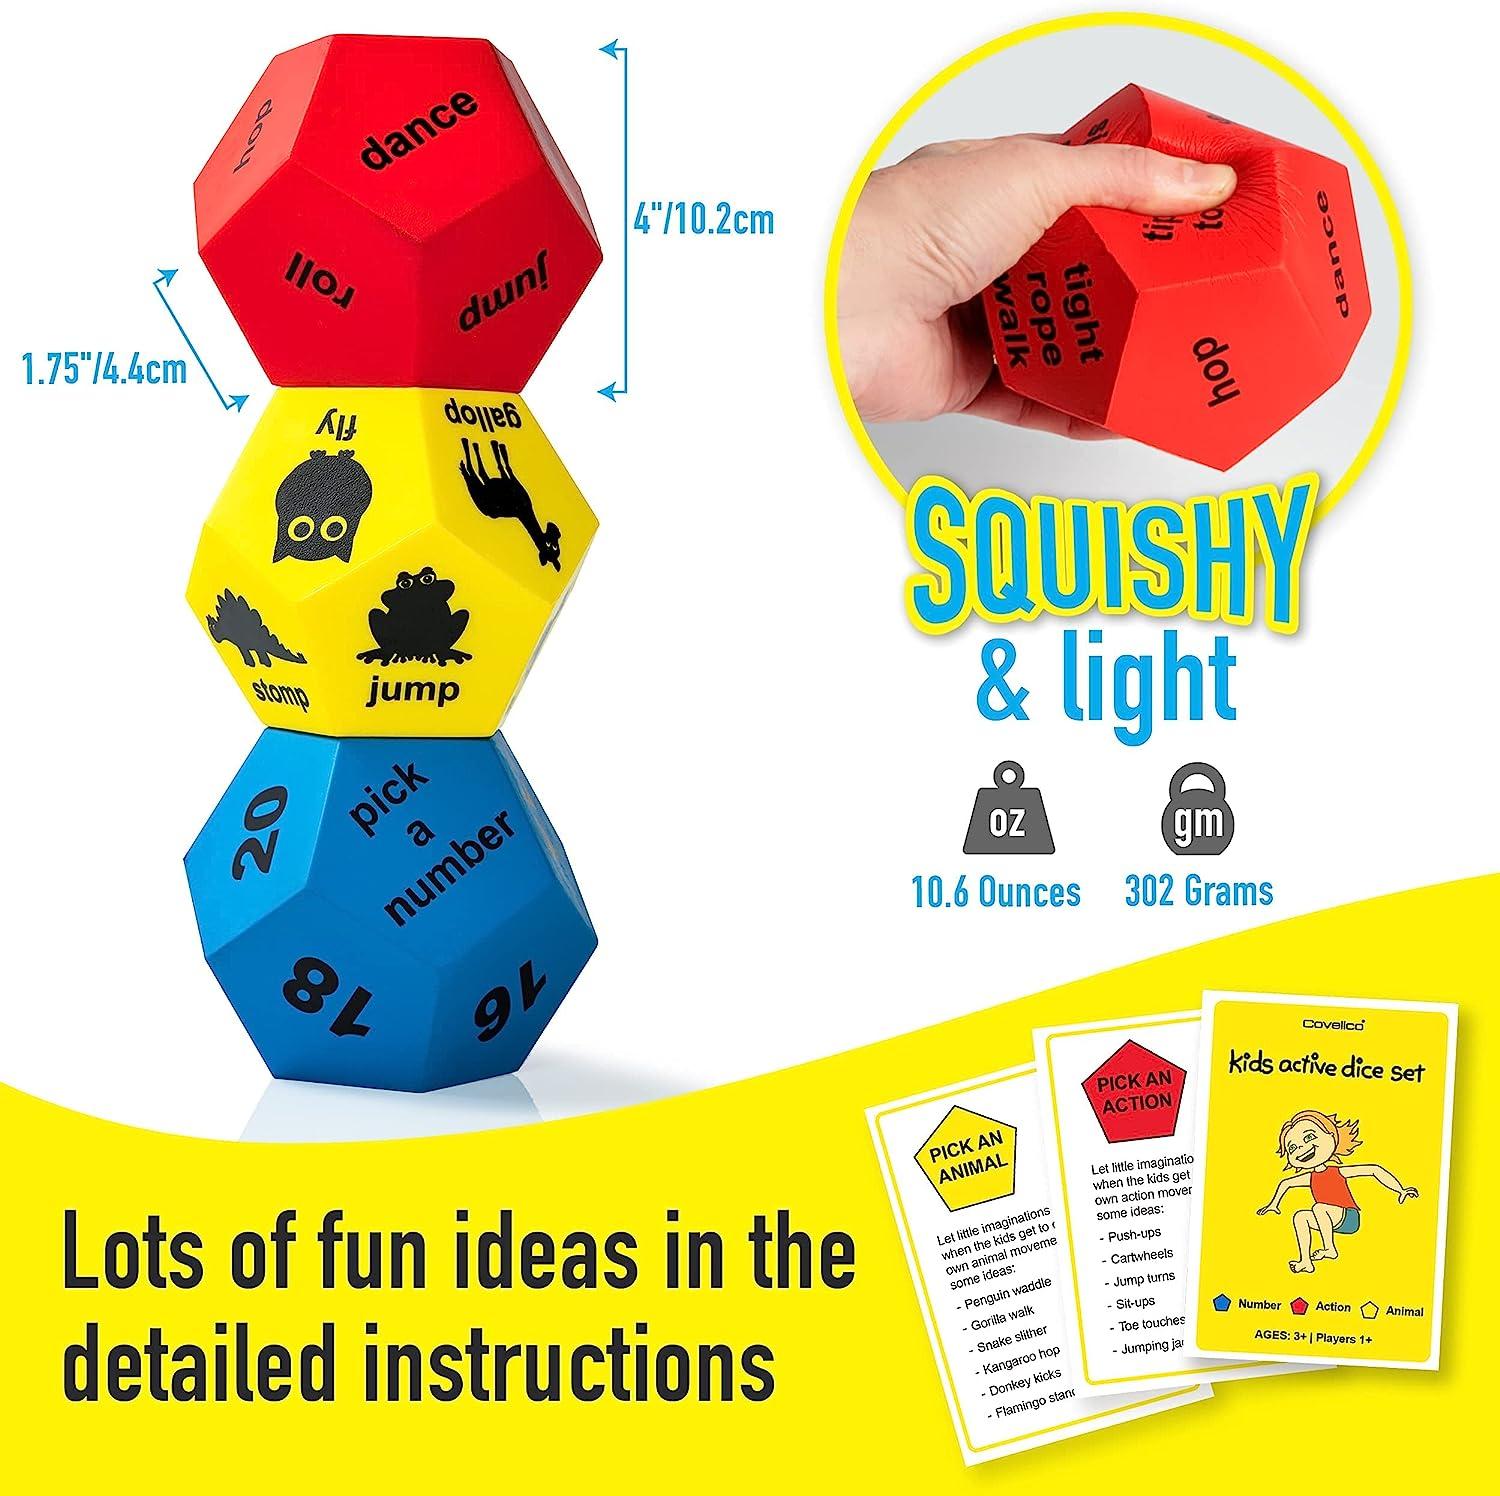 Roll the Dice Exercise Fitness Game Physical Education PE Brain Break 